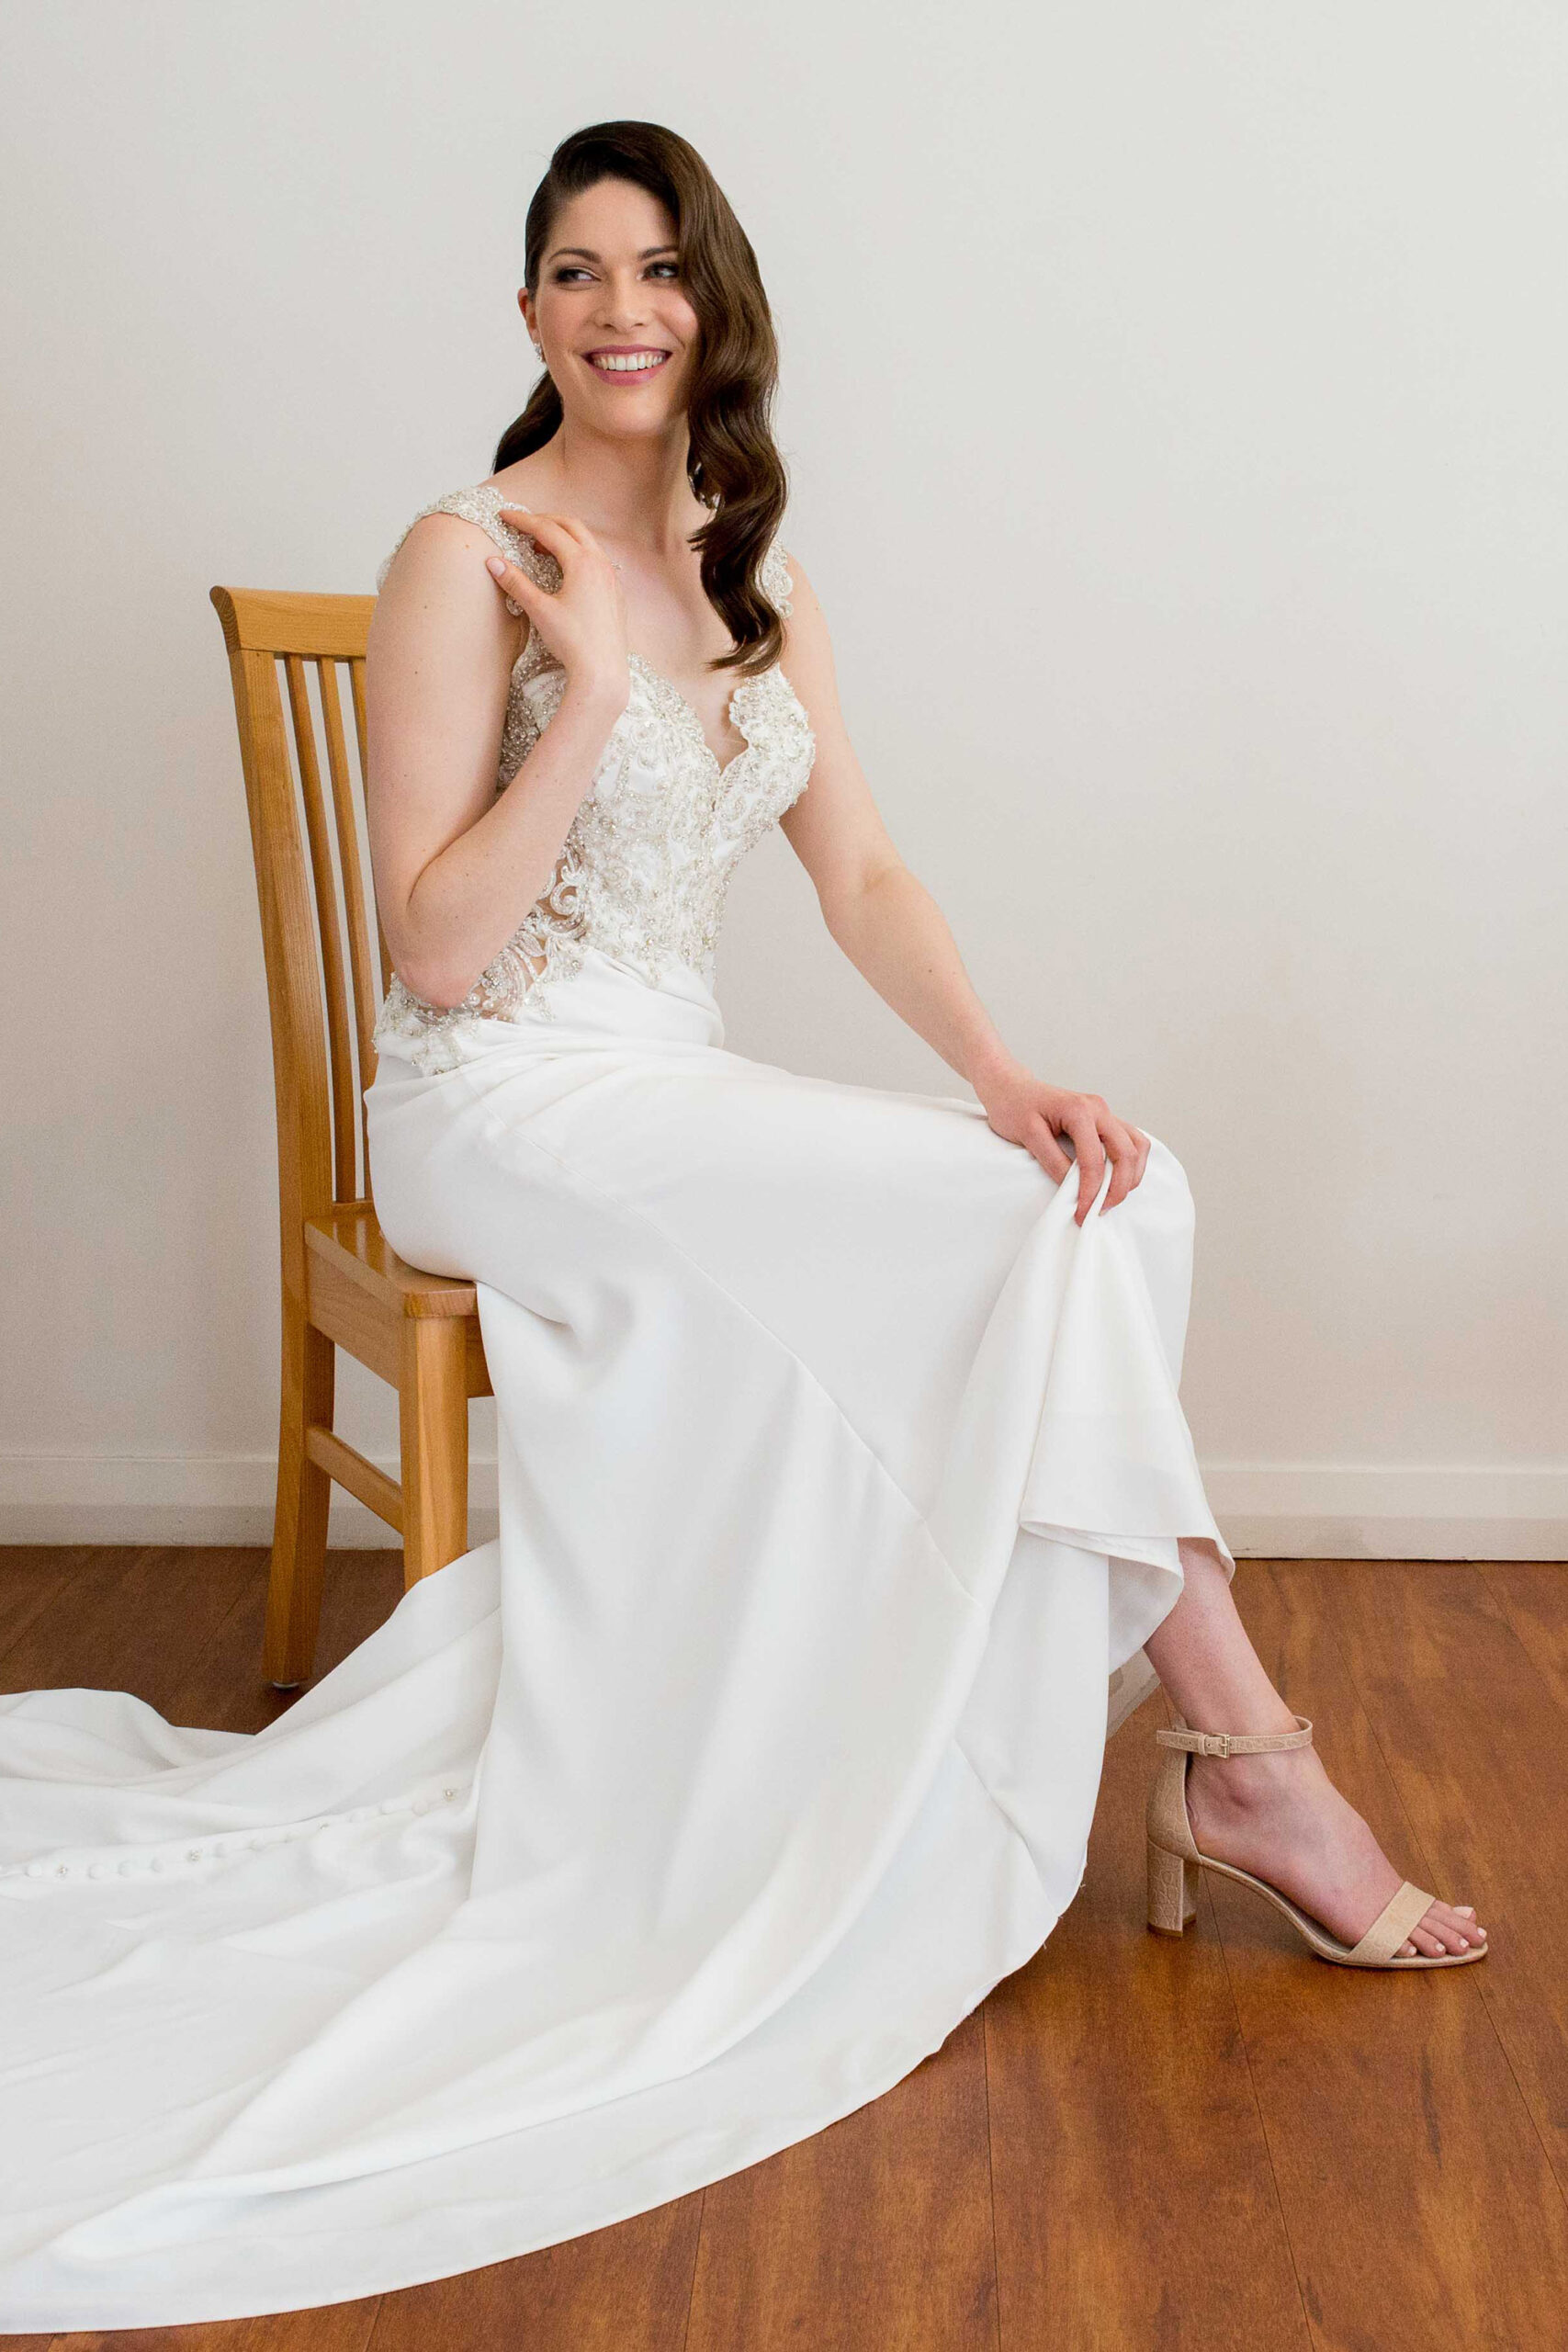 Taylor Joshua Elegant Waterview Wedding MMG Photography SBS 002 scaled